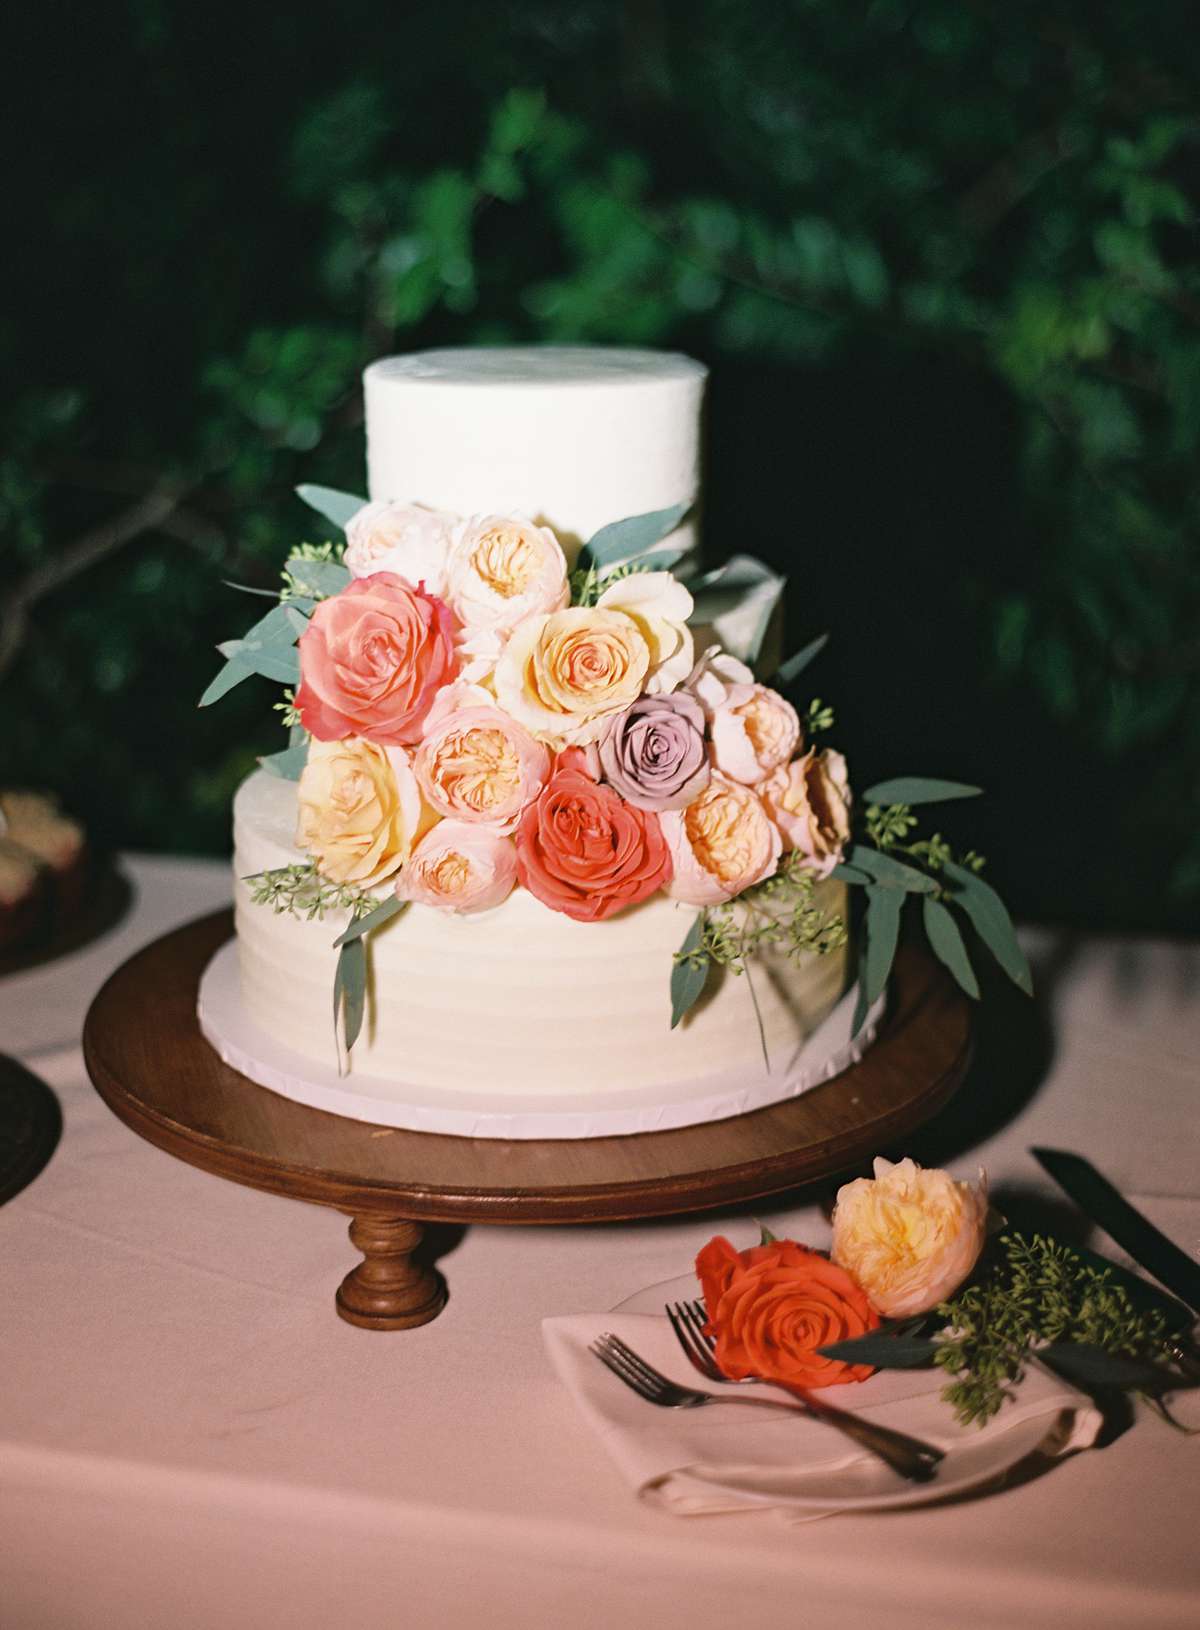 earl gray frosted wedding cake with floral accents